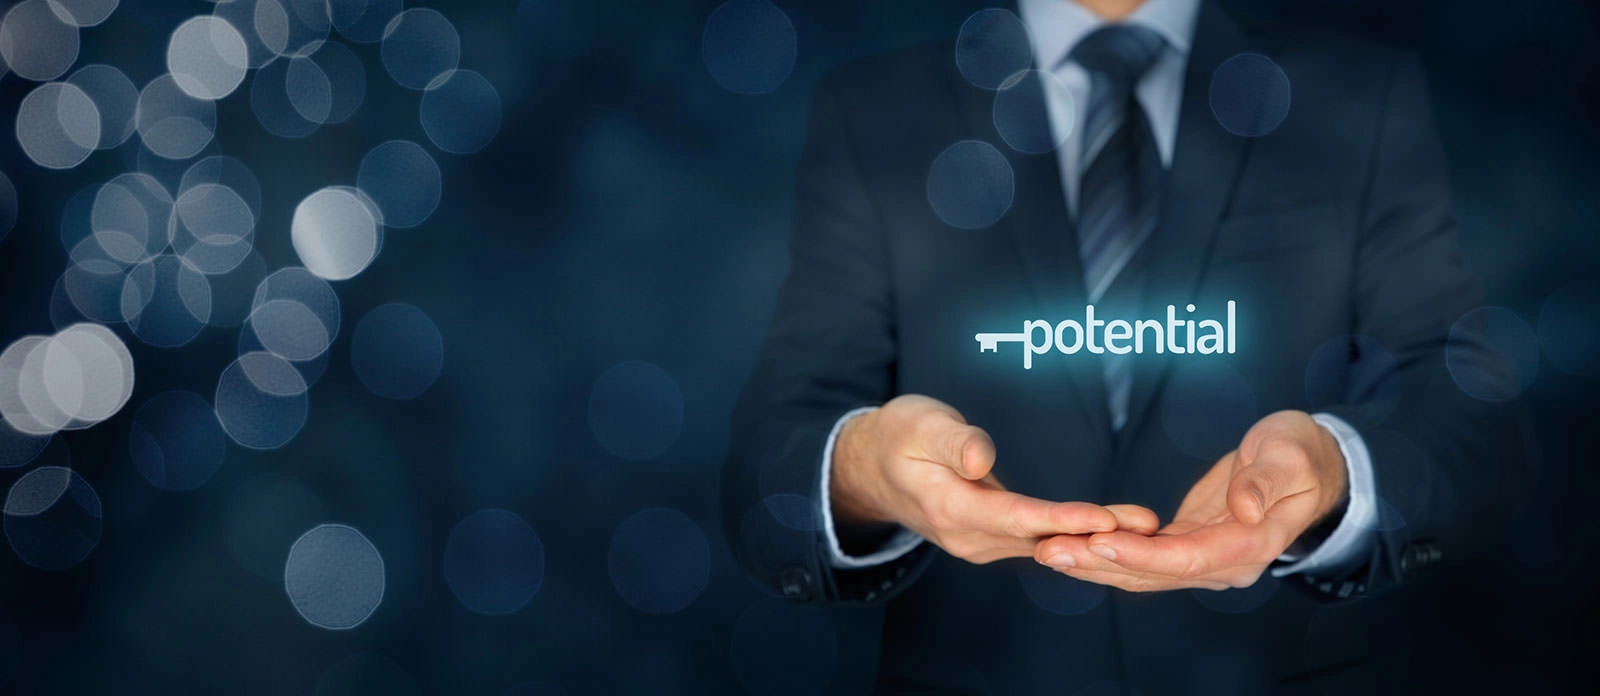 Innovationsconsulting - Potentiale finden